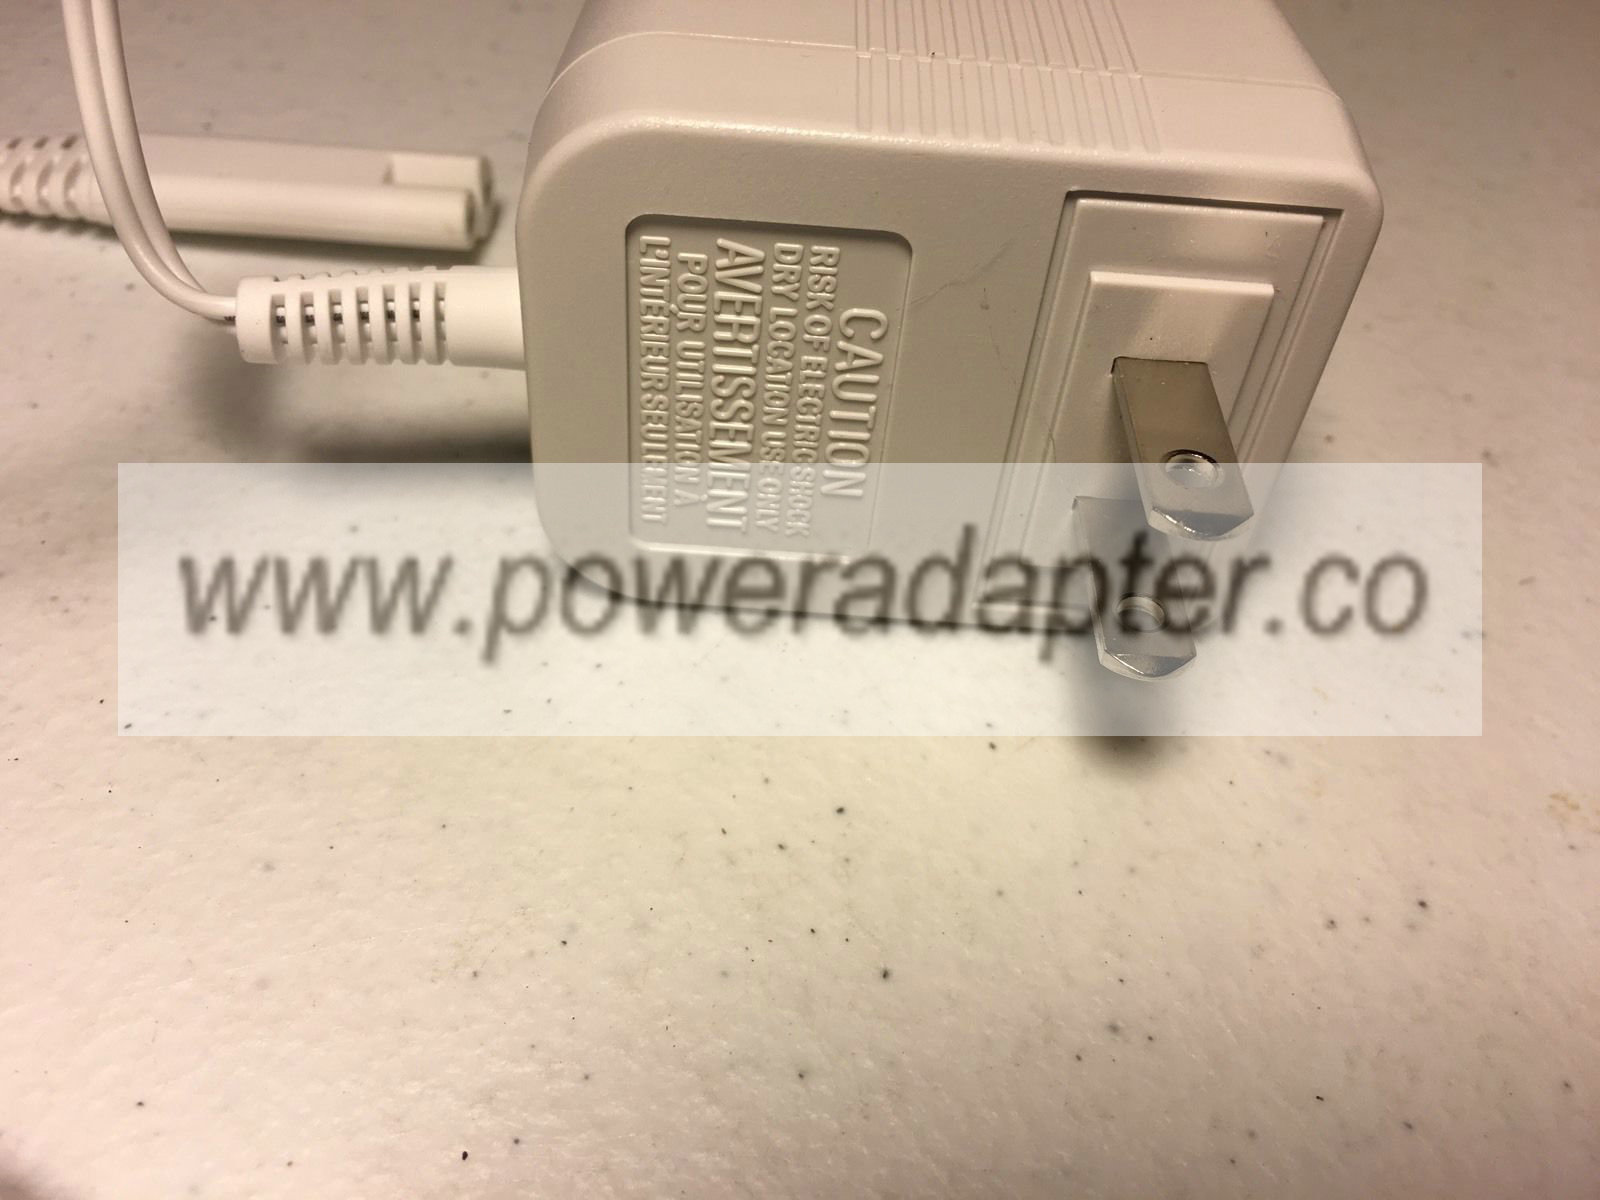 Power Adapter Charger for WP-450 wp-440 WP-360 WP450 Waterpik Transformer Kit with two seperate hole-Charger for WP-450